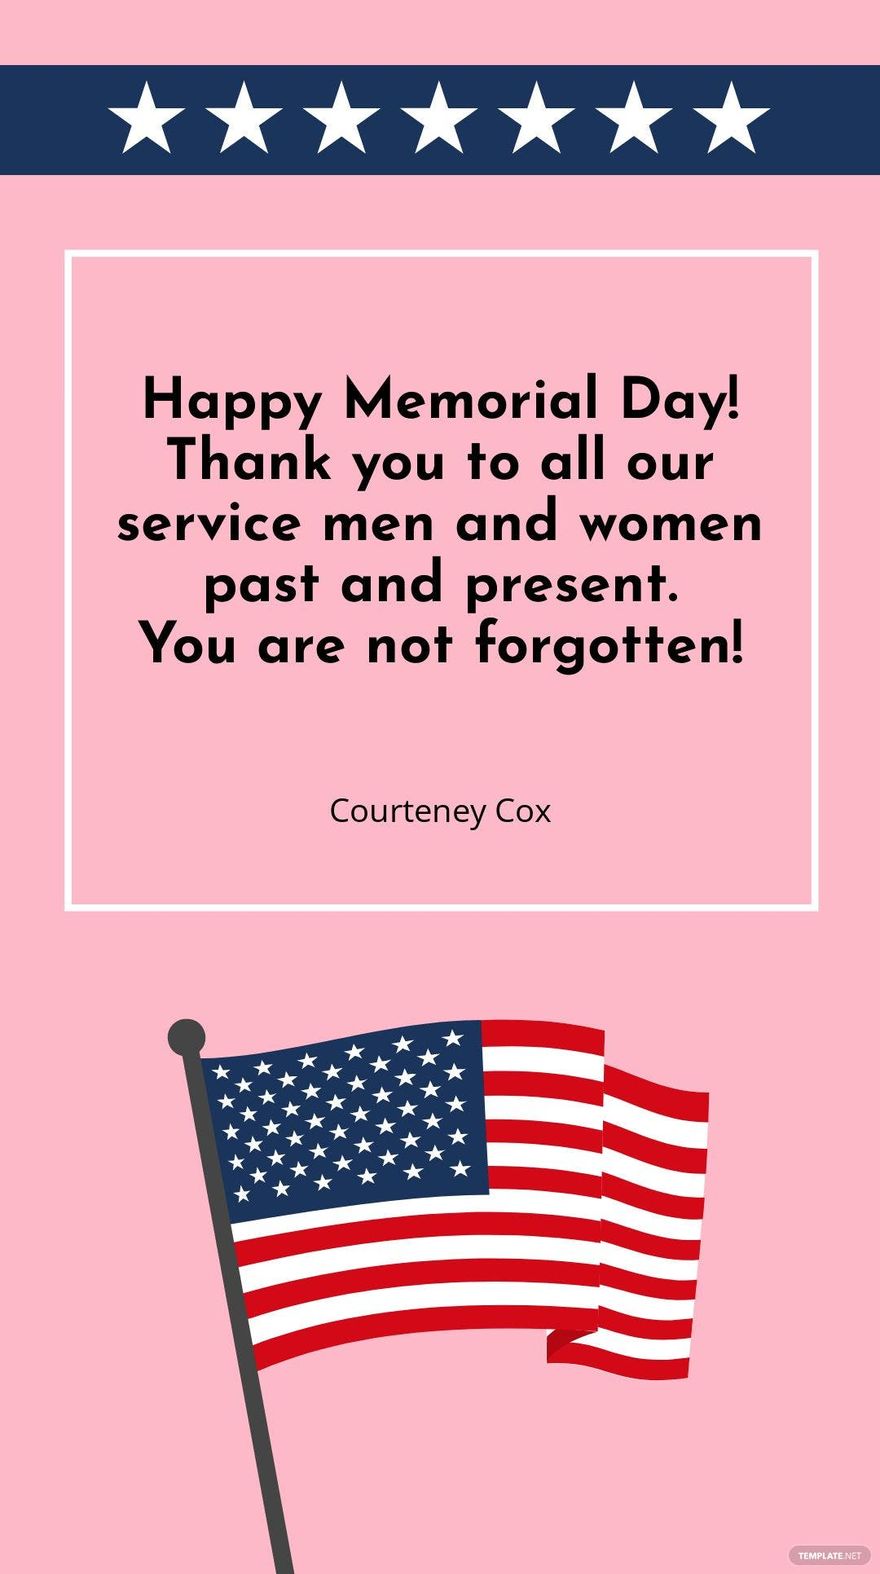 Courteney Cox - Happy Memorial Day! Thank you to all our service men and women past and present. You are not forgotten! in JPG